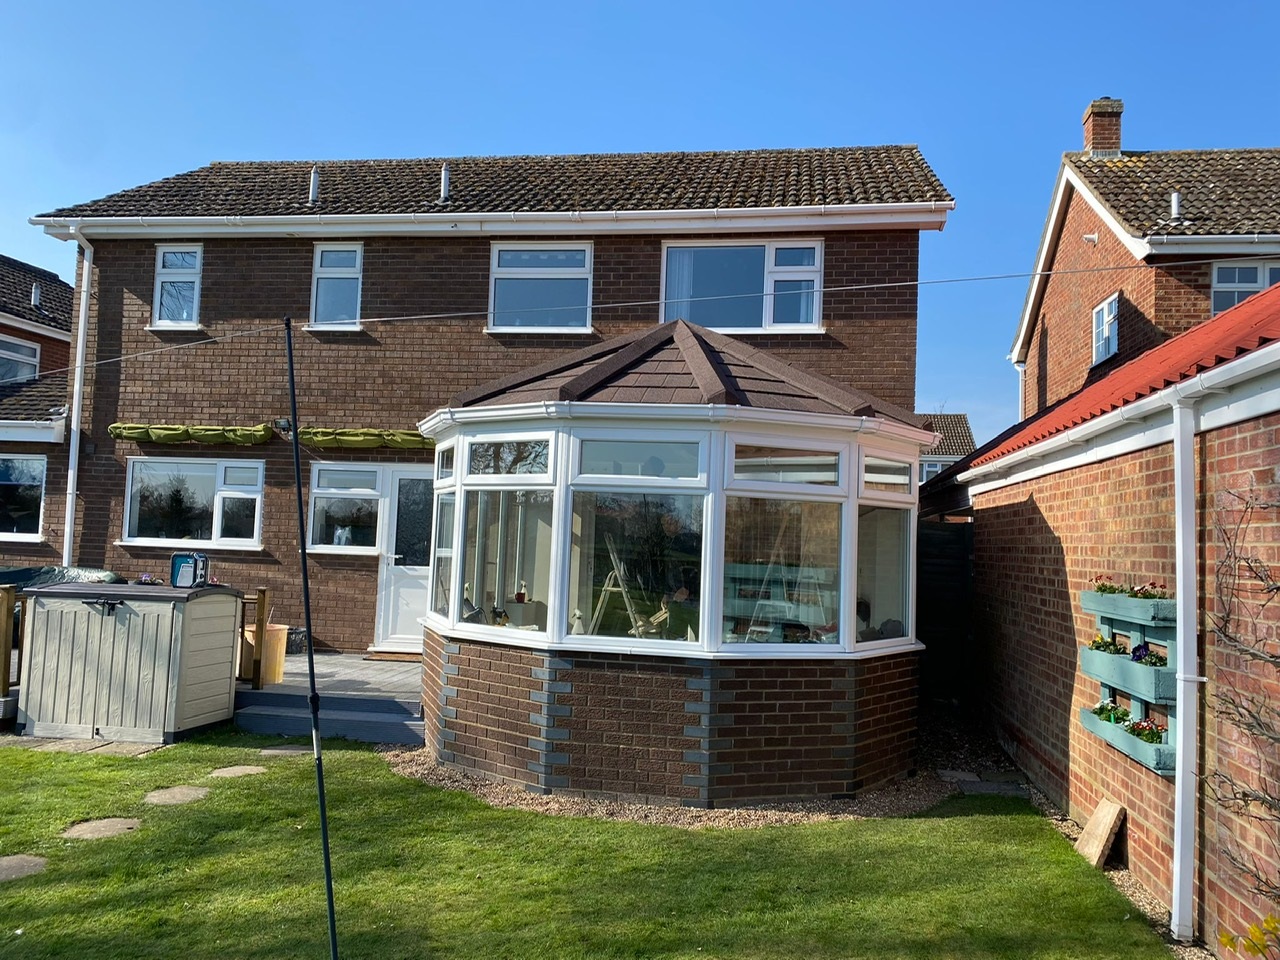 Insulated Conservatory Roof conversion in Woxham, Norfolk